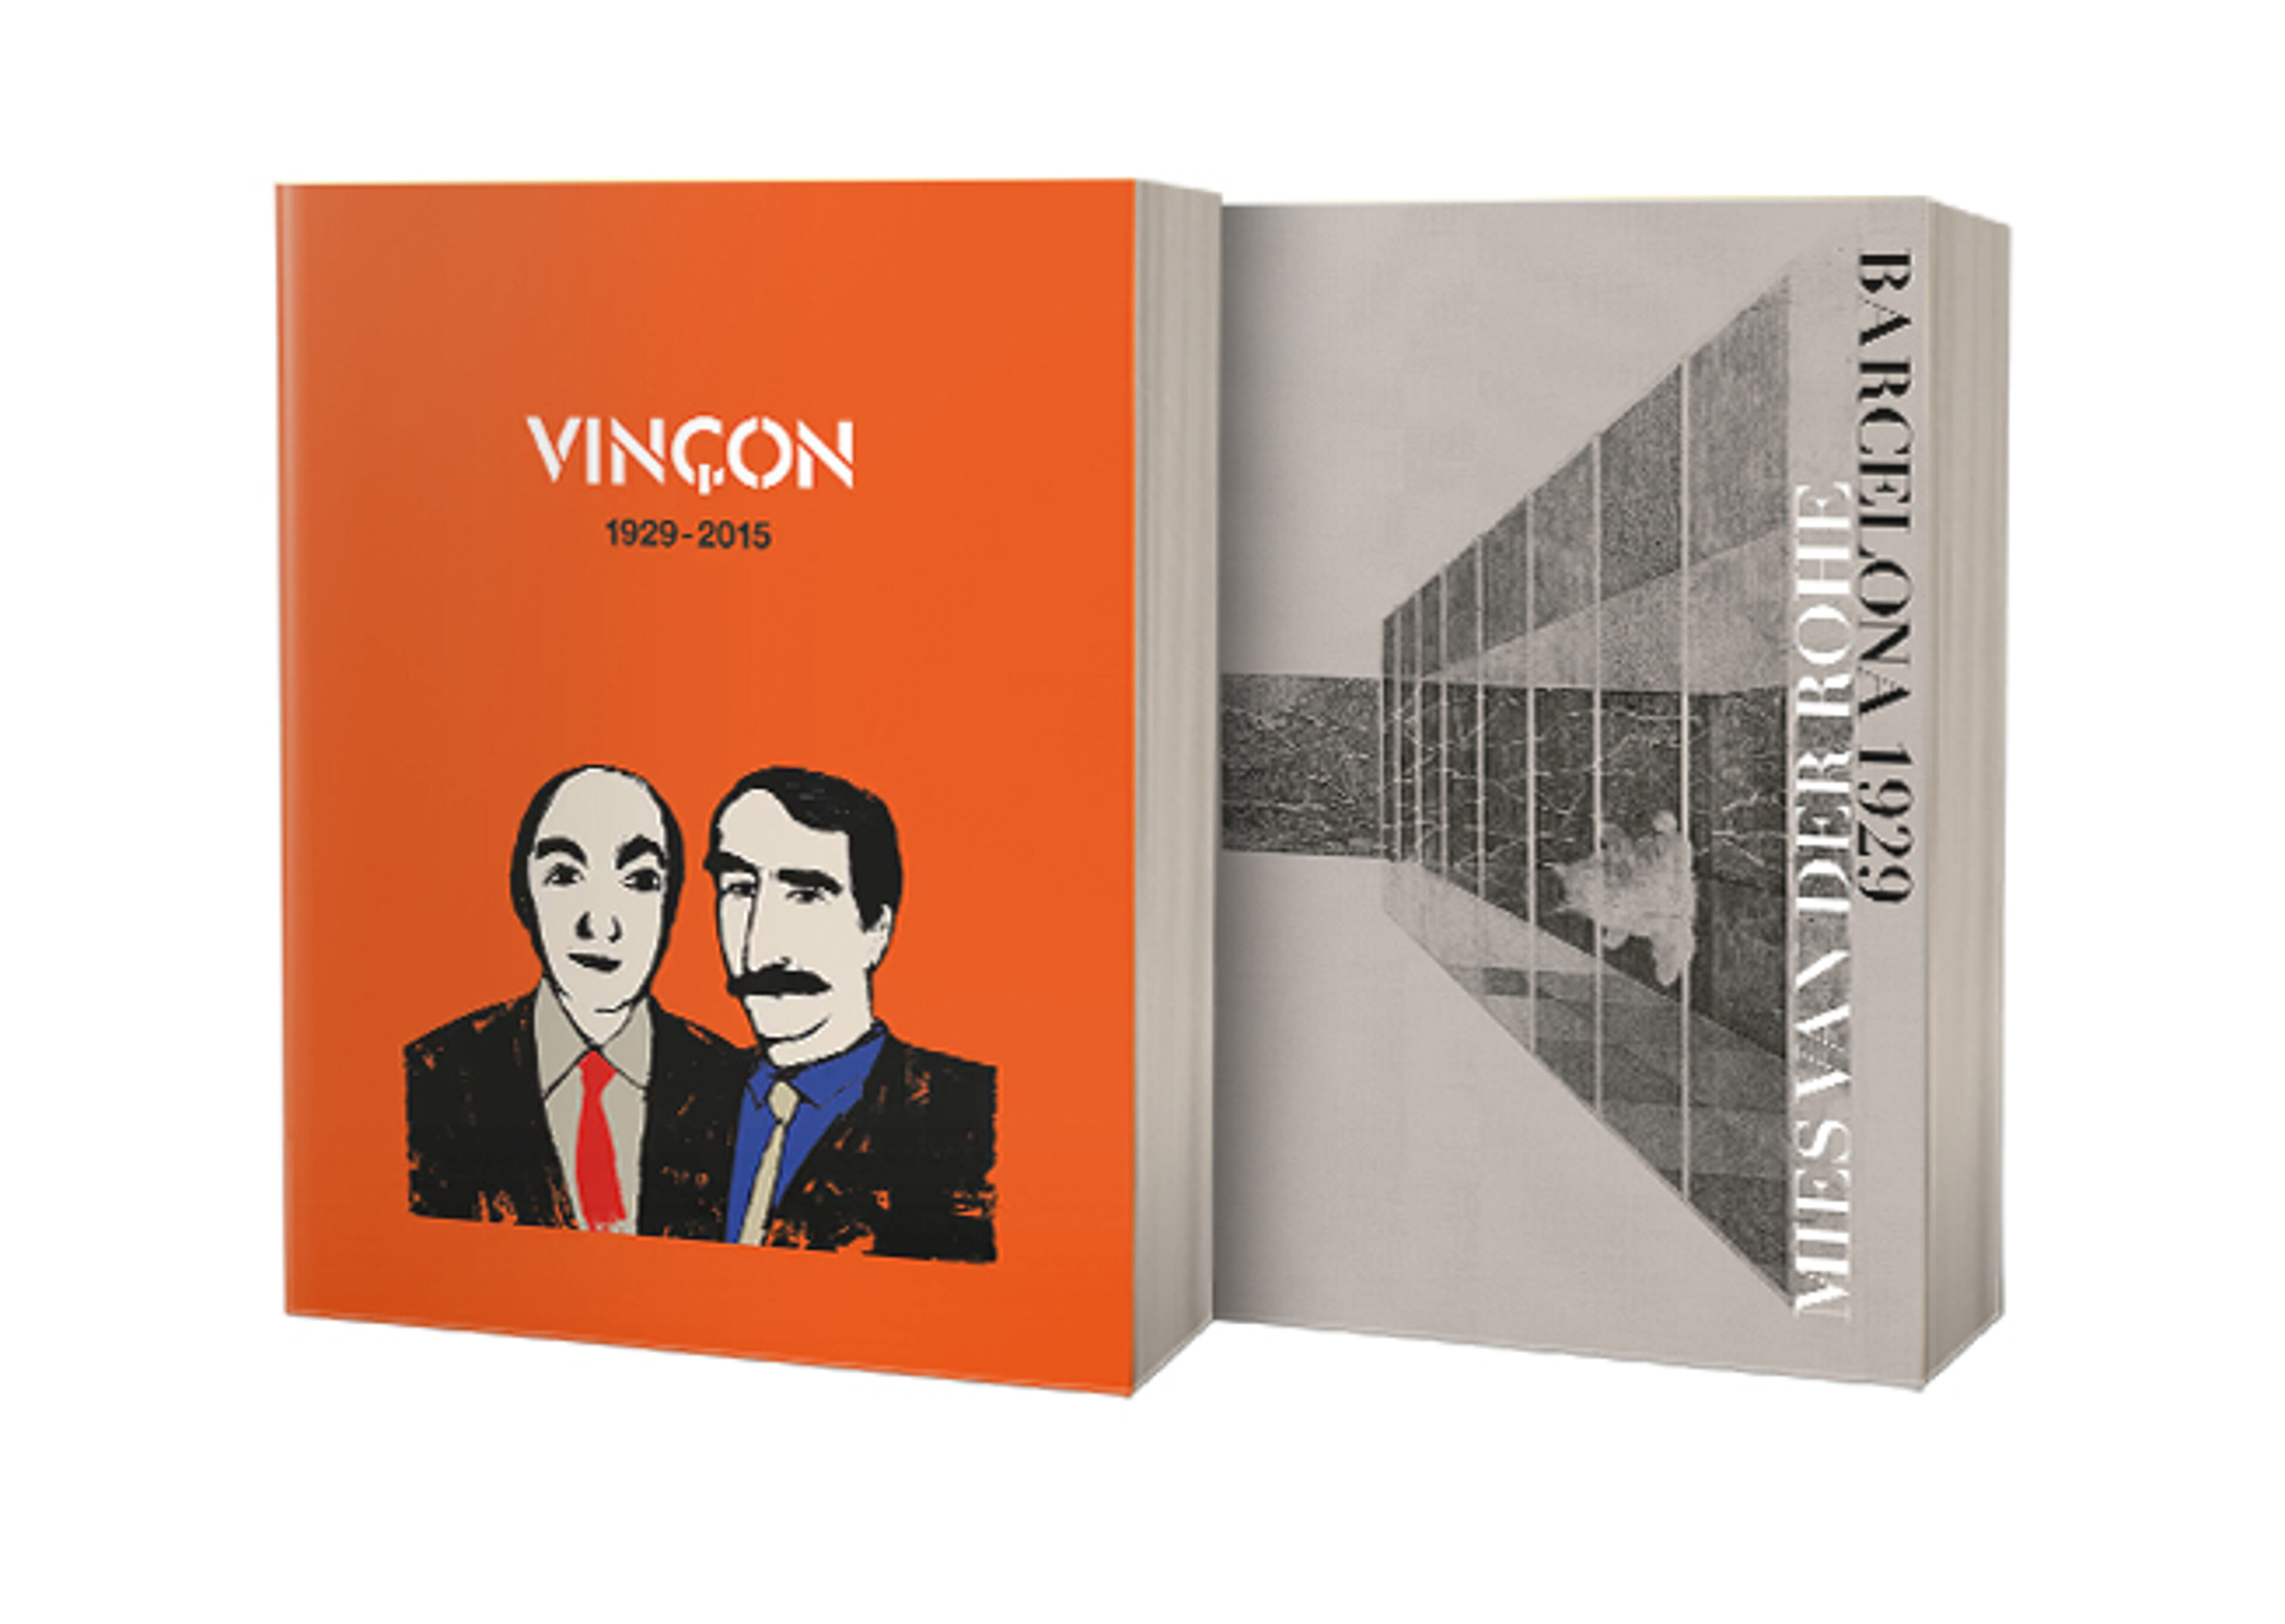 A book with an orange cover featuring a stylized illustration of two men, with the title 'VINÇON 1929-2015' above them.